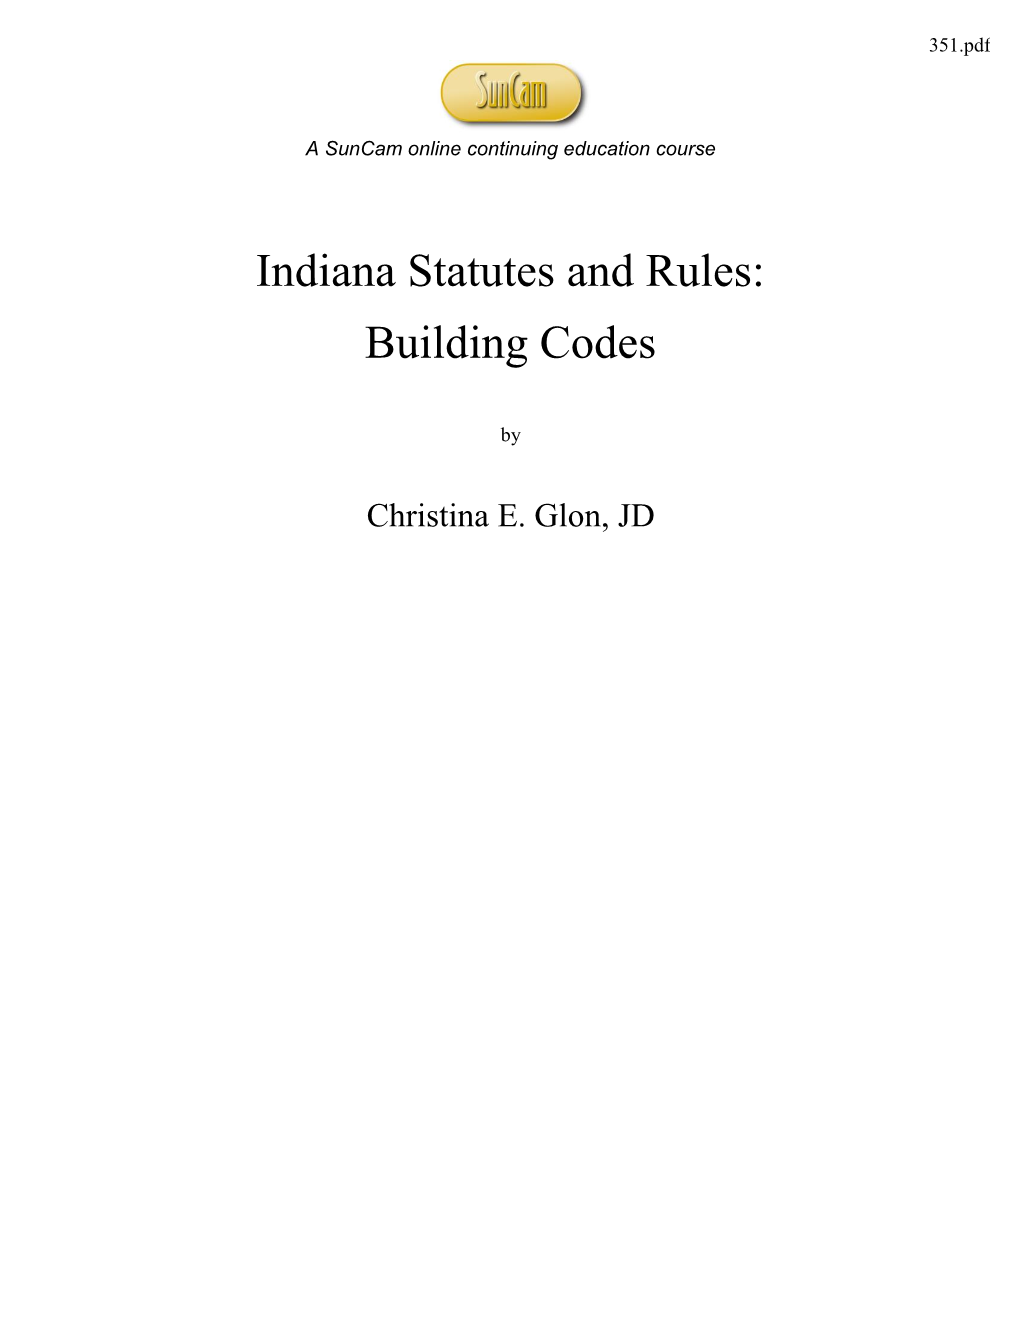 Indiana Statutes and Rules: Building Codes